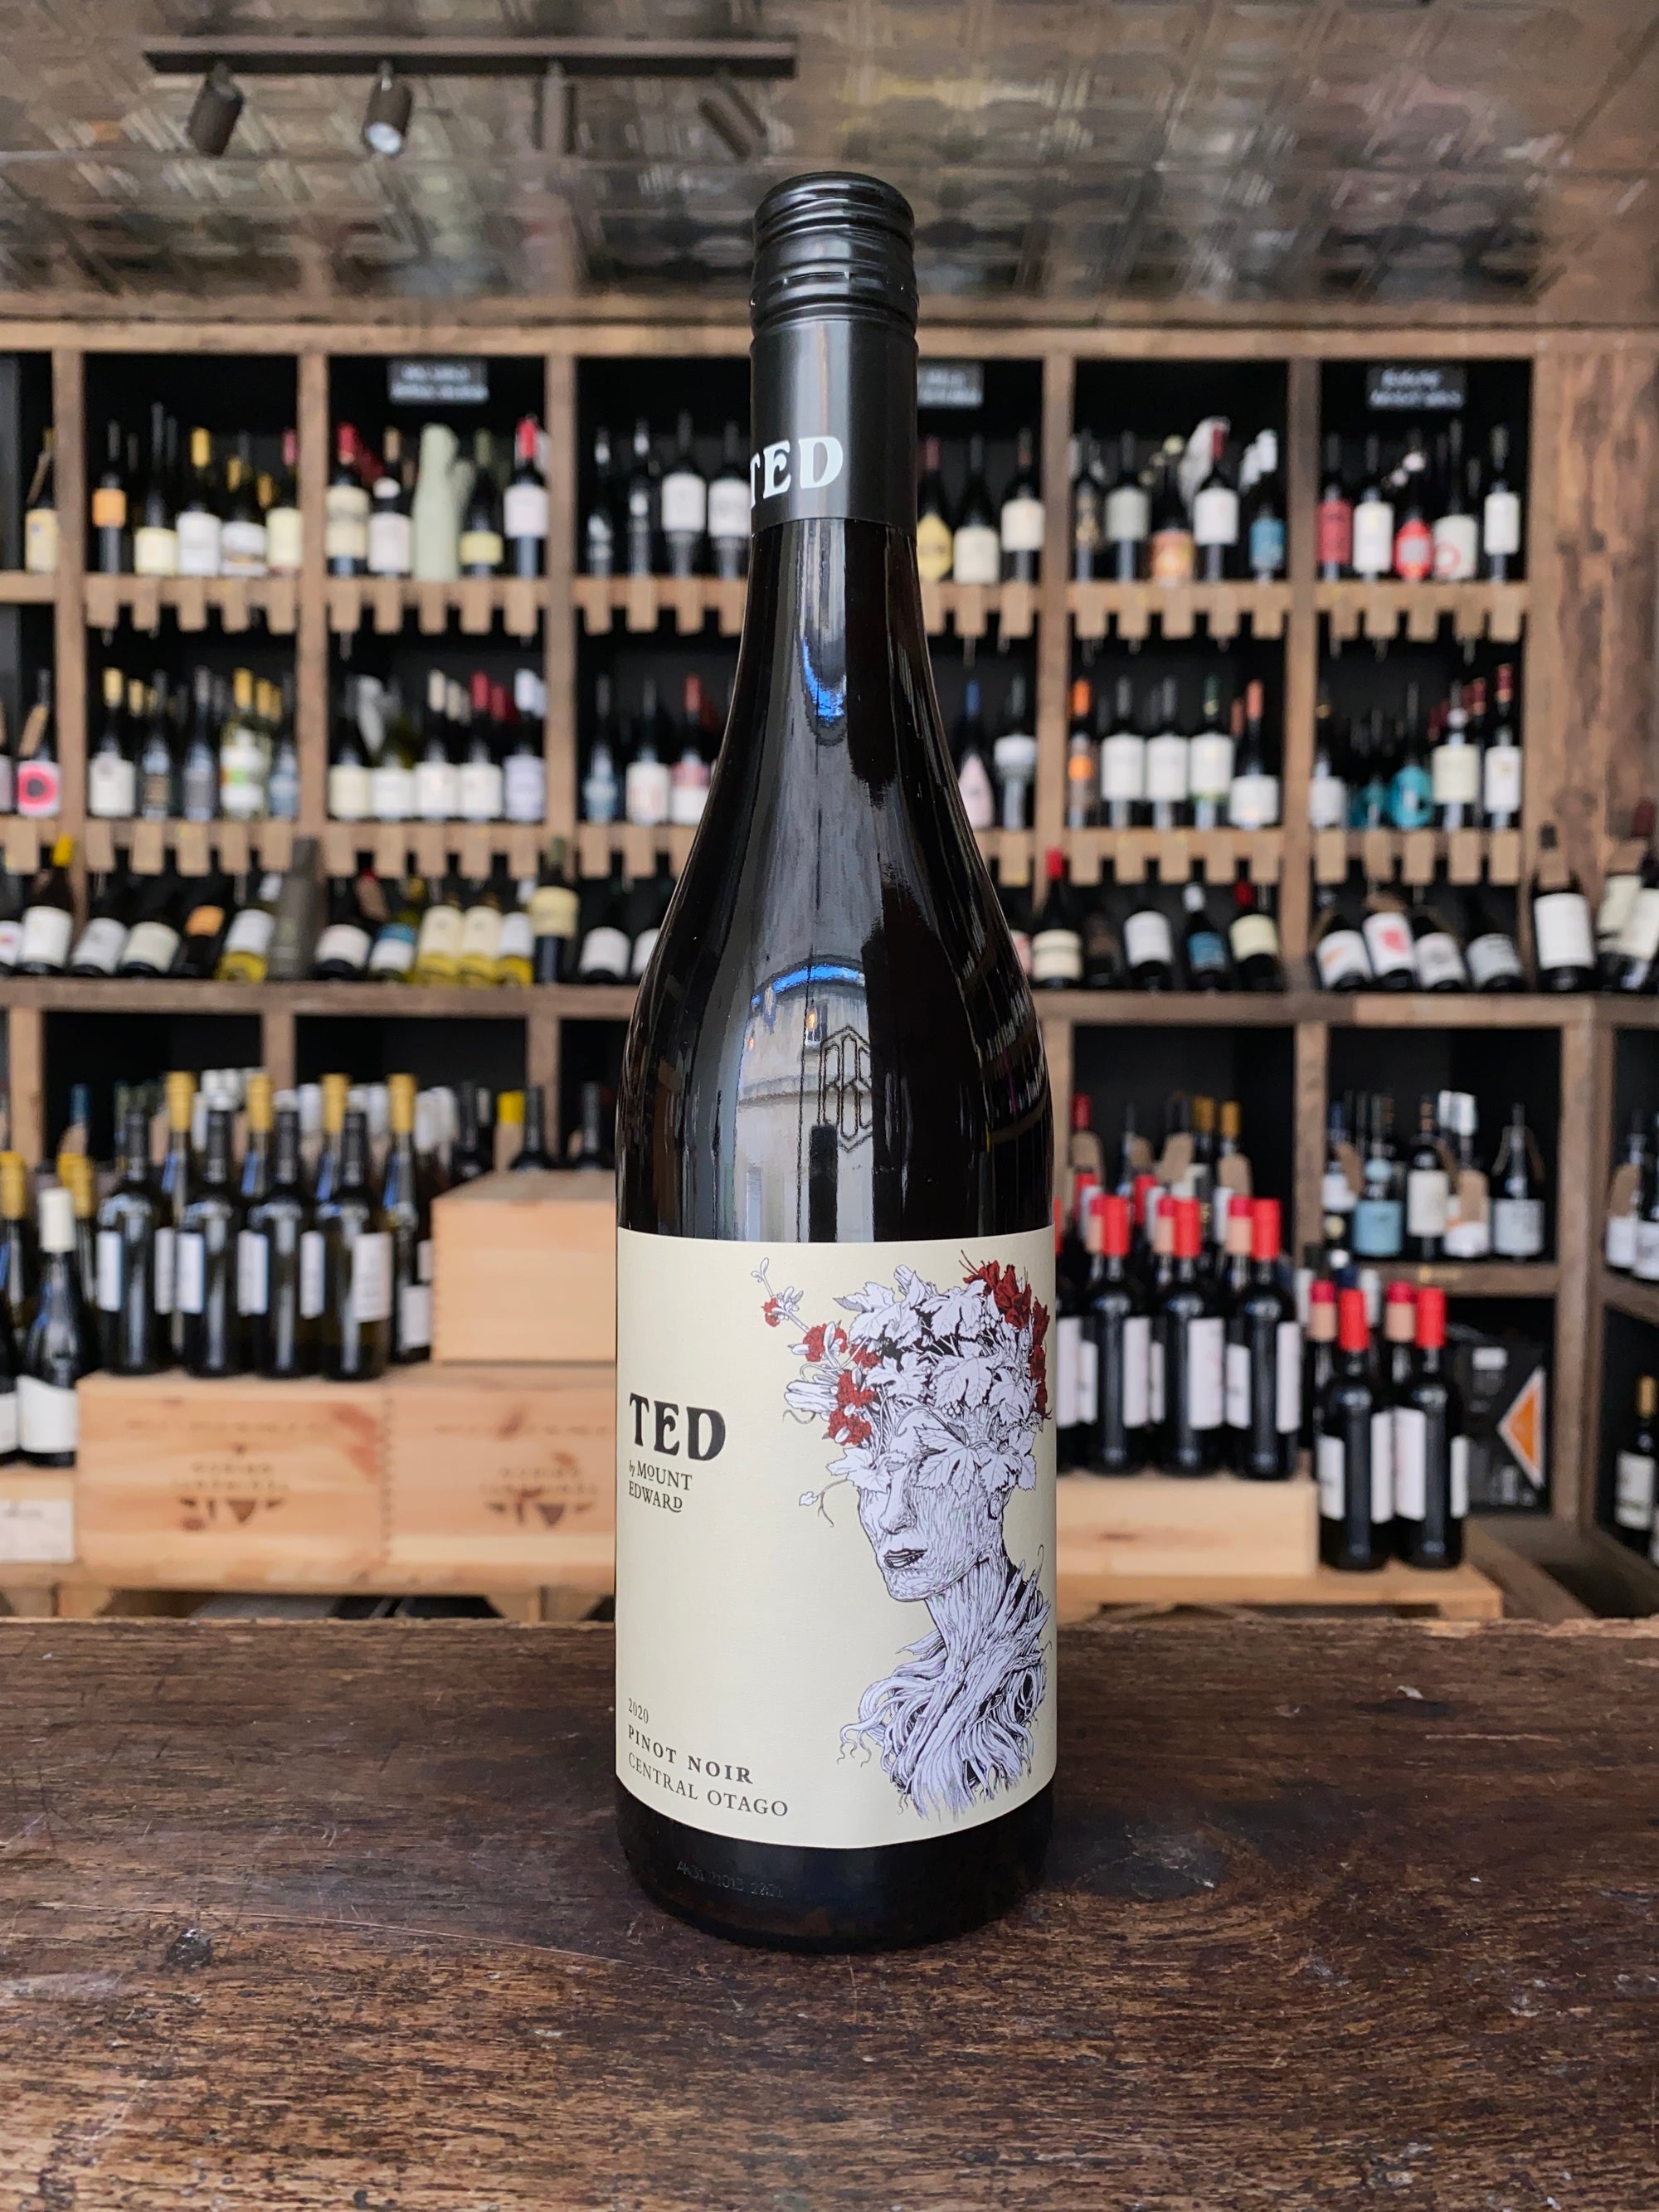 Ted Pinot Noir, Mount Edward, Central Otago